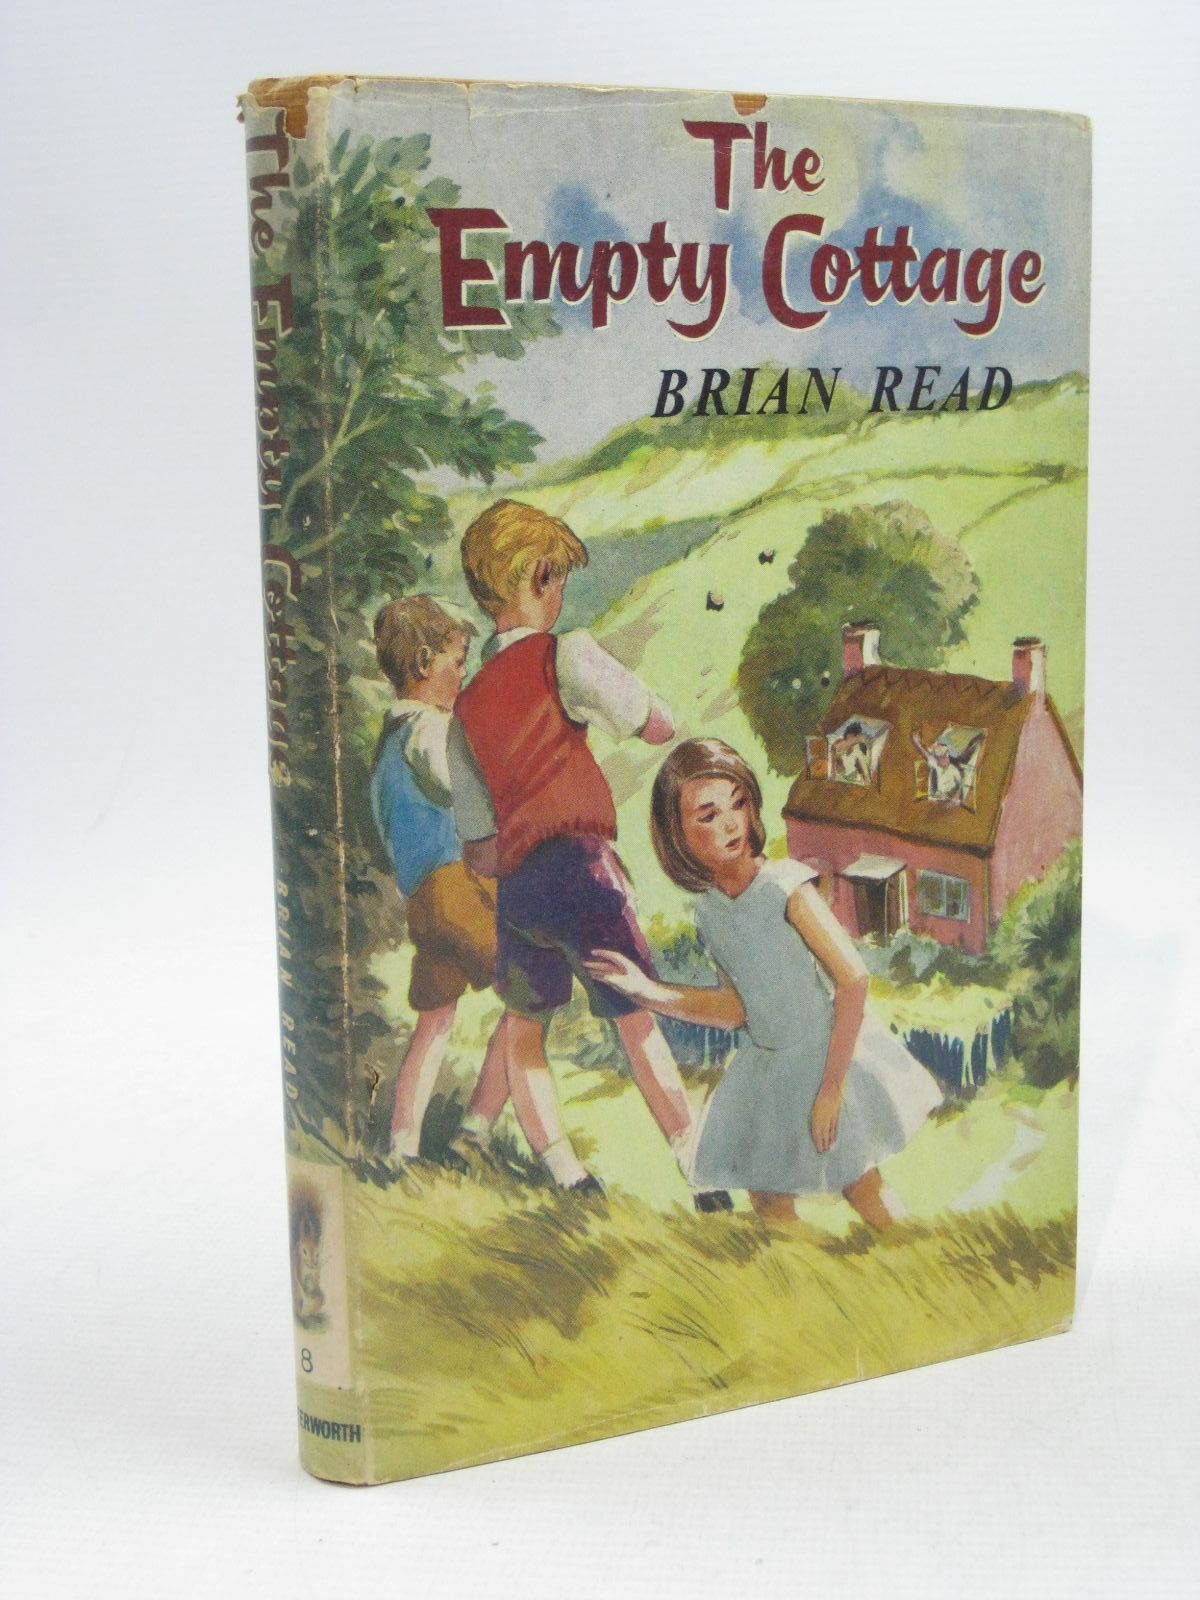 Photo of THE EMPTY COTTAGE written by Read, Brian illustrated by Goodall, John S. published by Lutterworth Press (STOCK CODE: 1504470)  for sale by Stella & Rose's Books